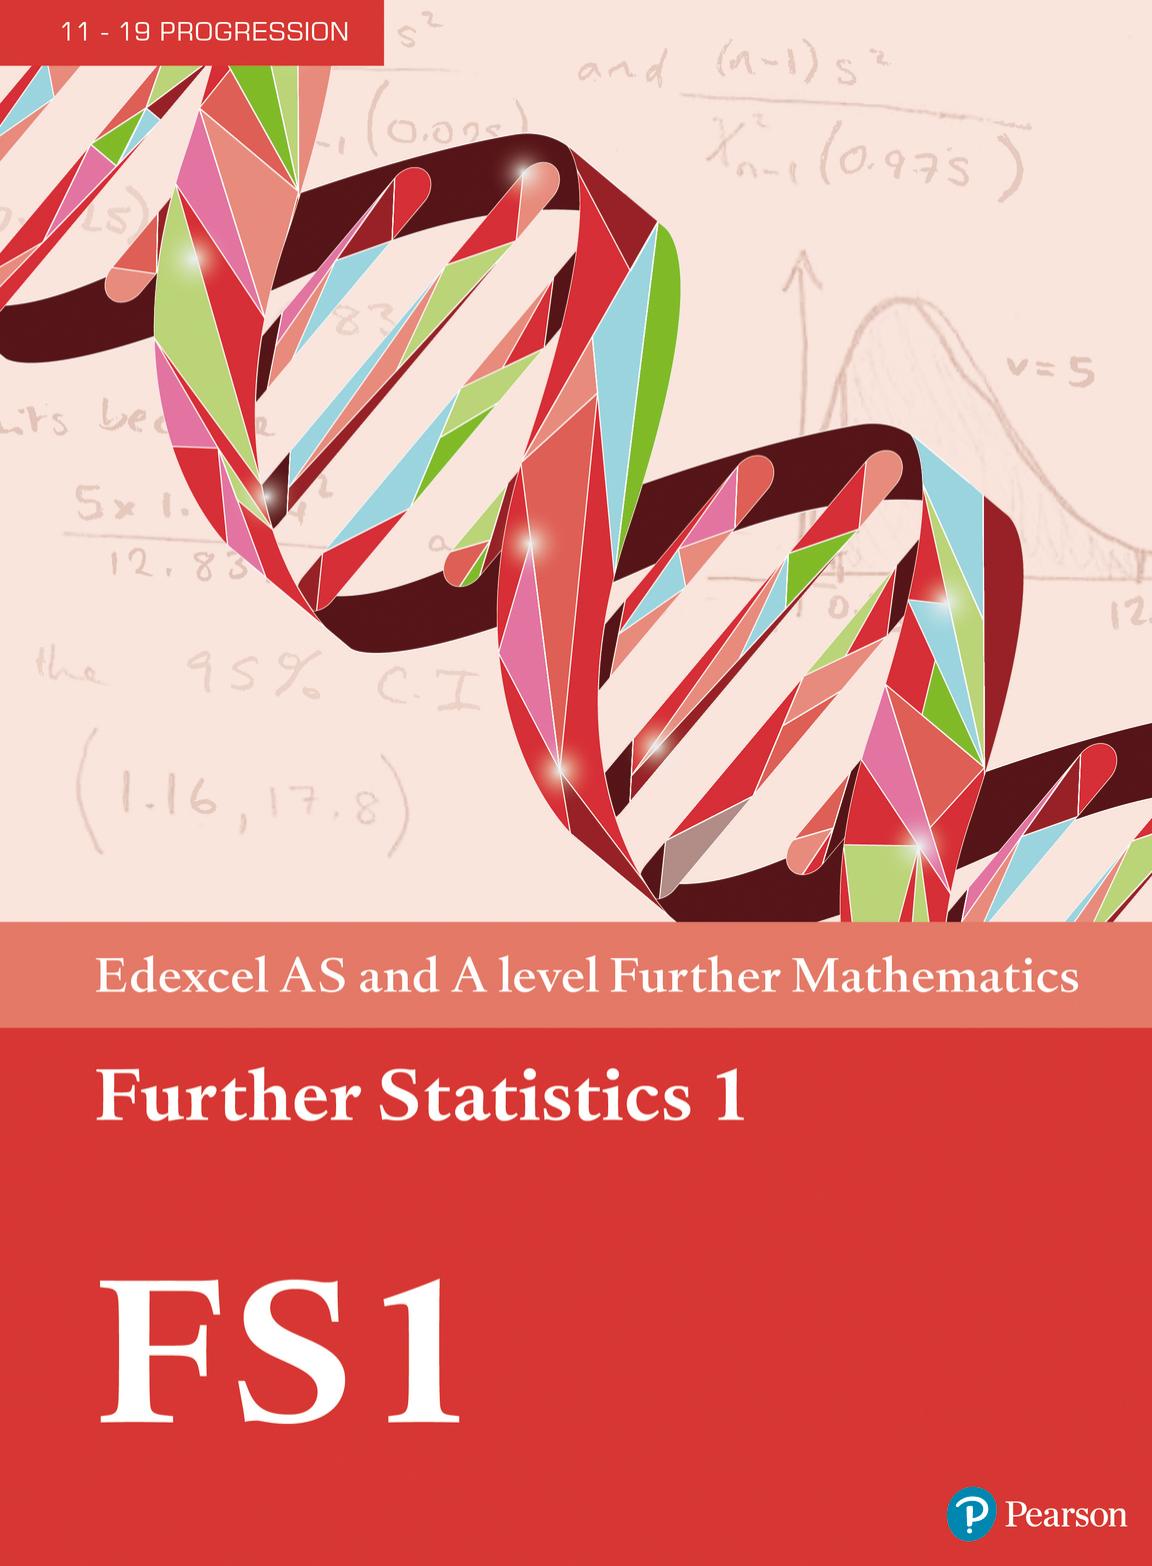 Edexcel AS and A level Further Mathematics Further Statistics 1 by coll.